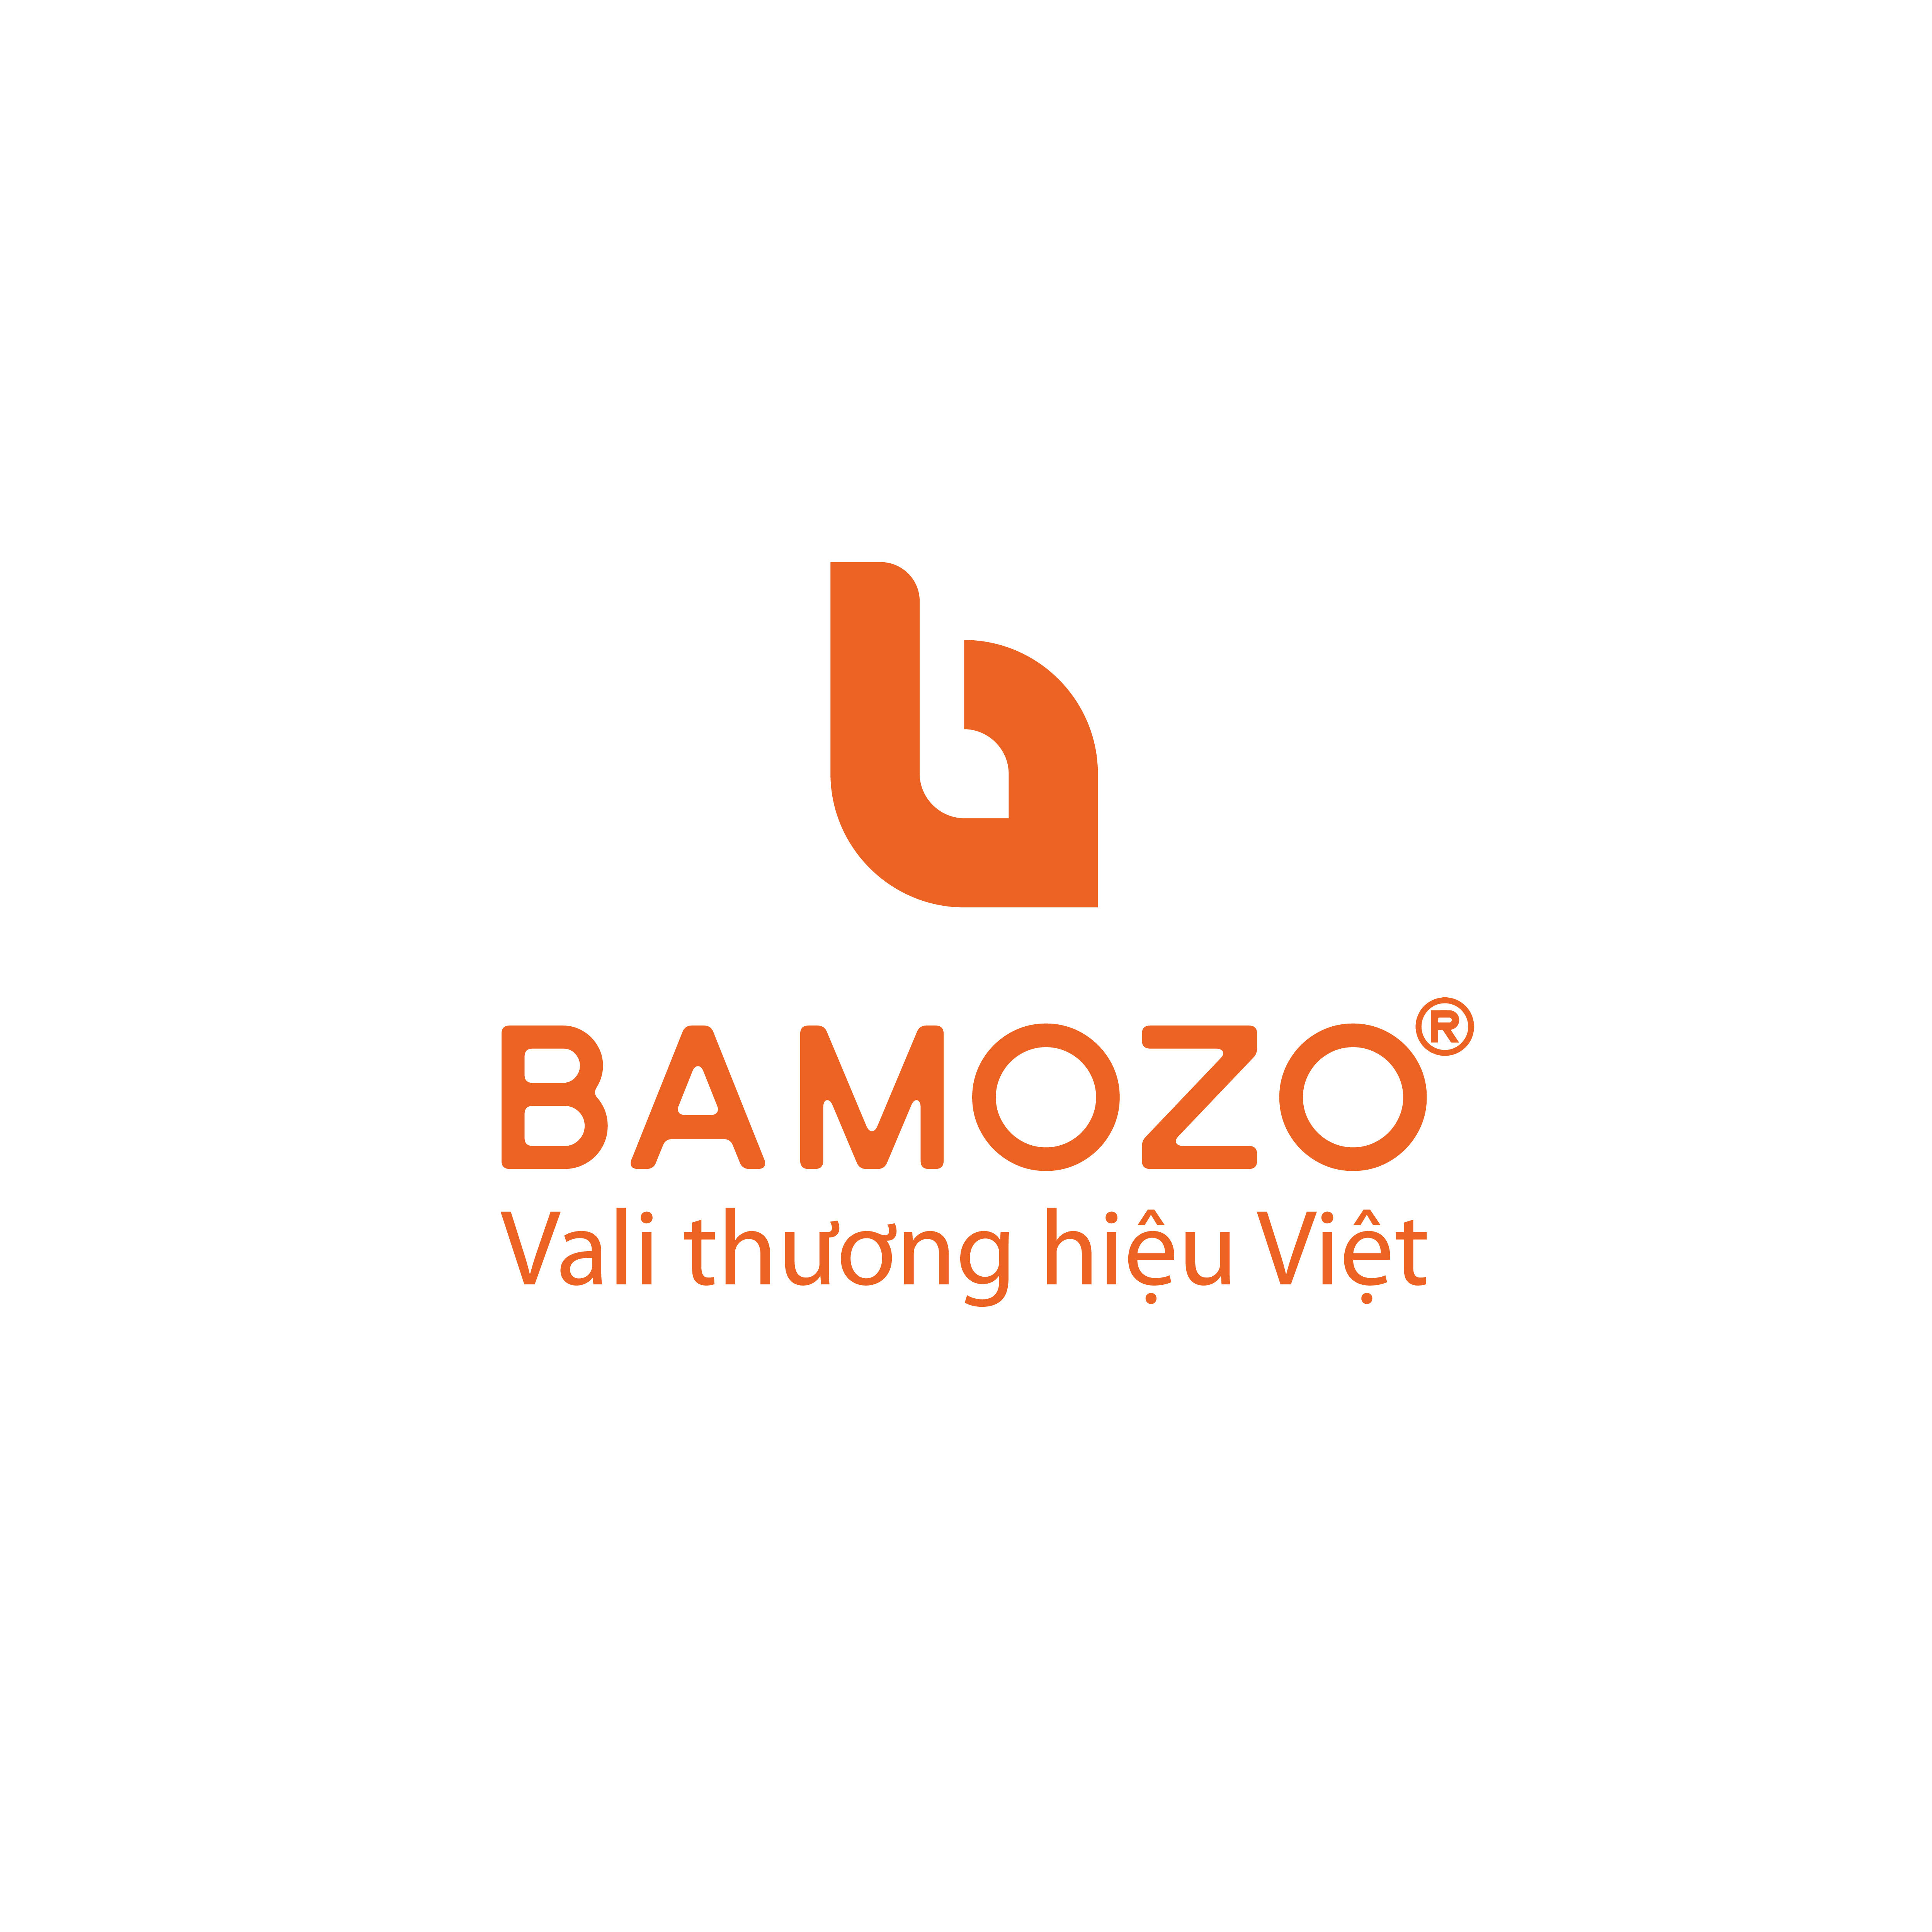 Bamozo Official